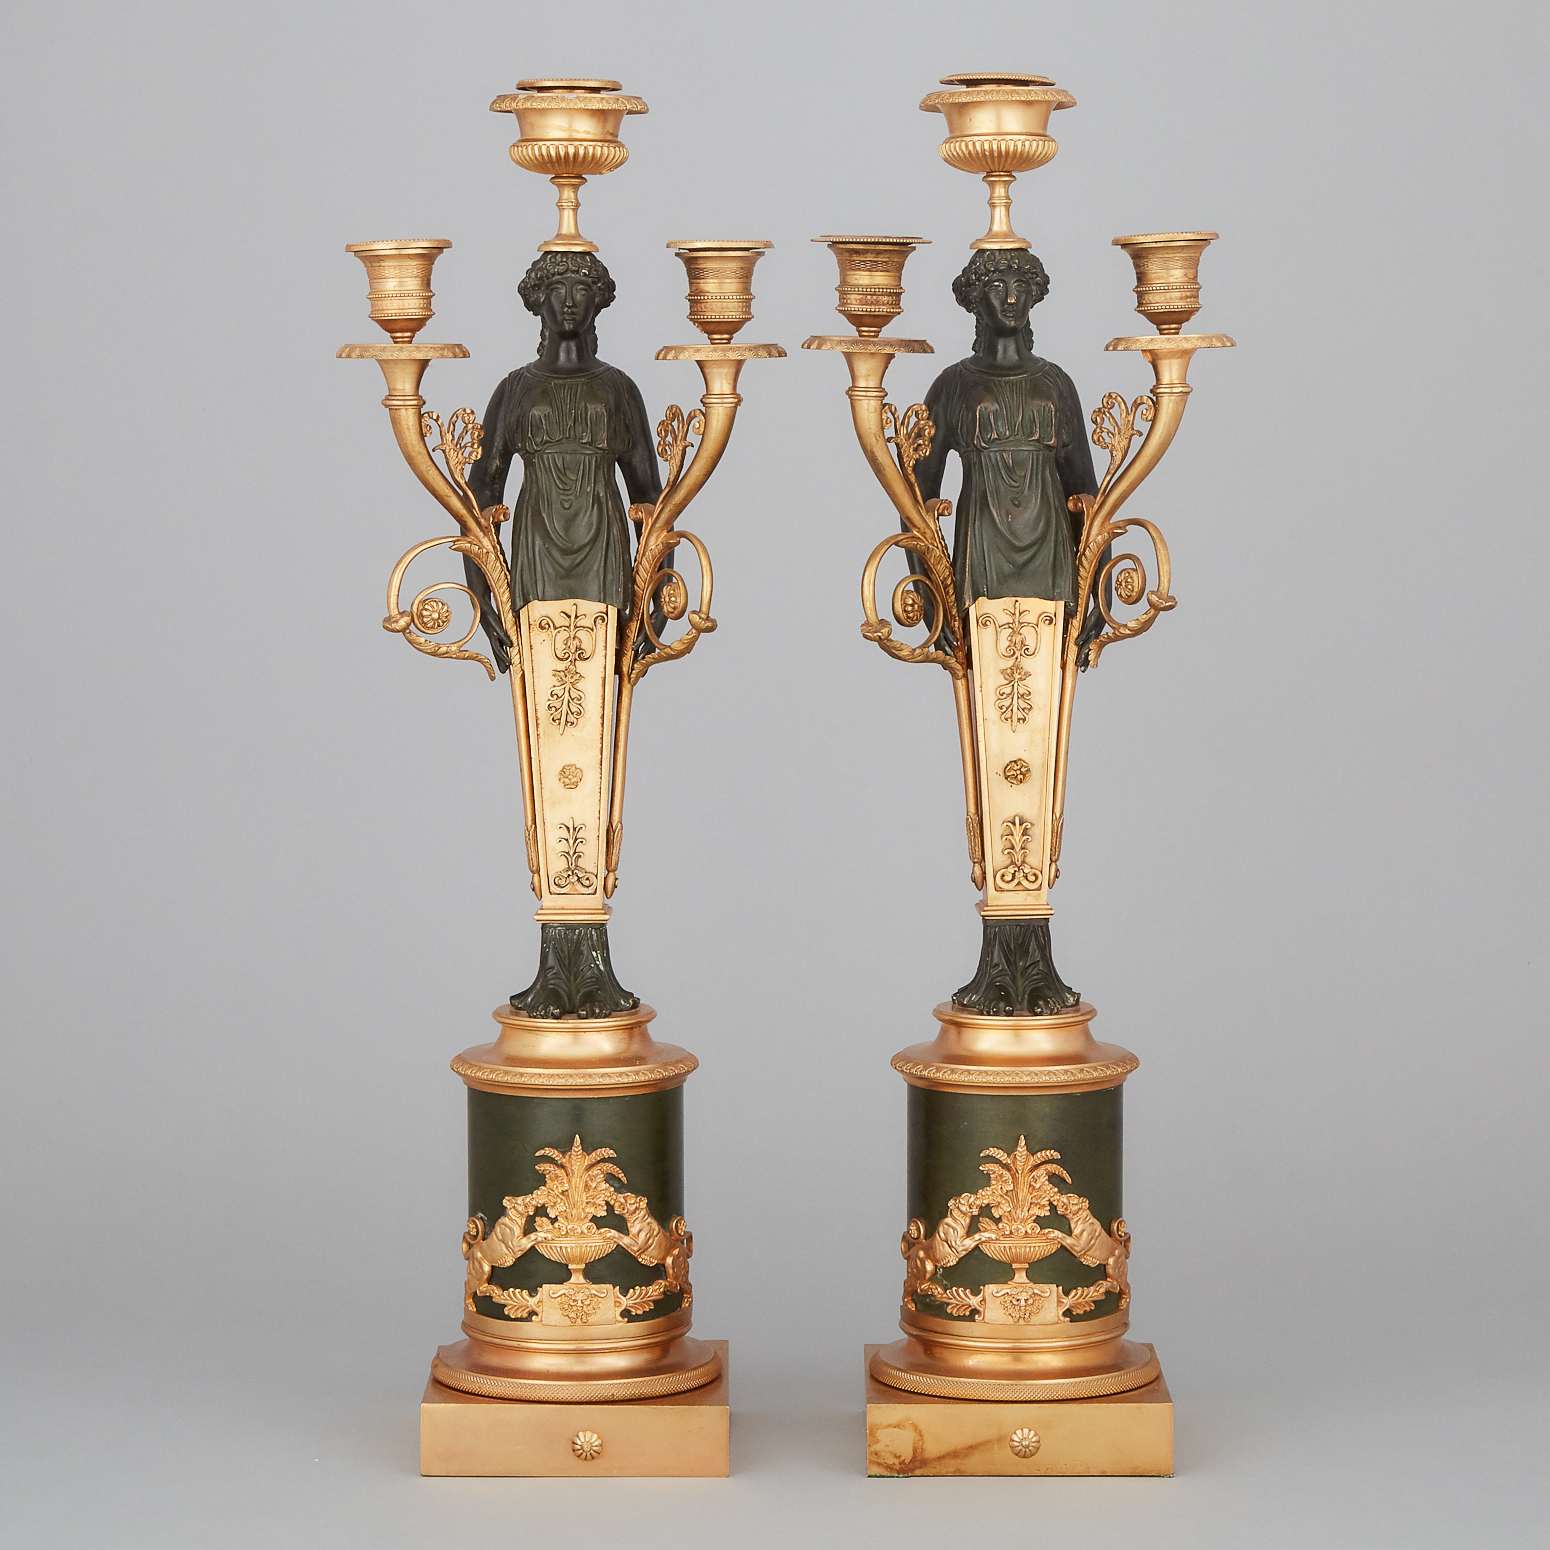 Pair of French Empire Style Gilt and Patinated Bronze Three Light Figural Candelabra, 20th century